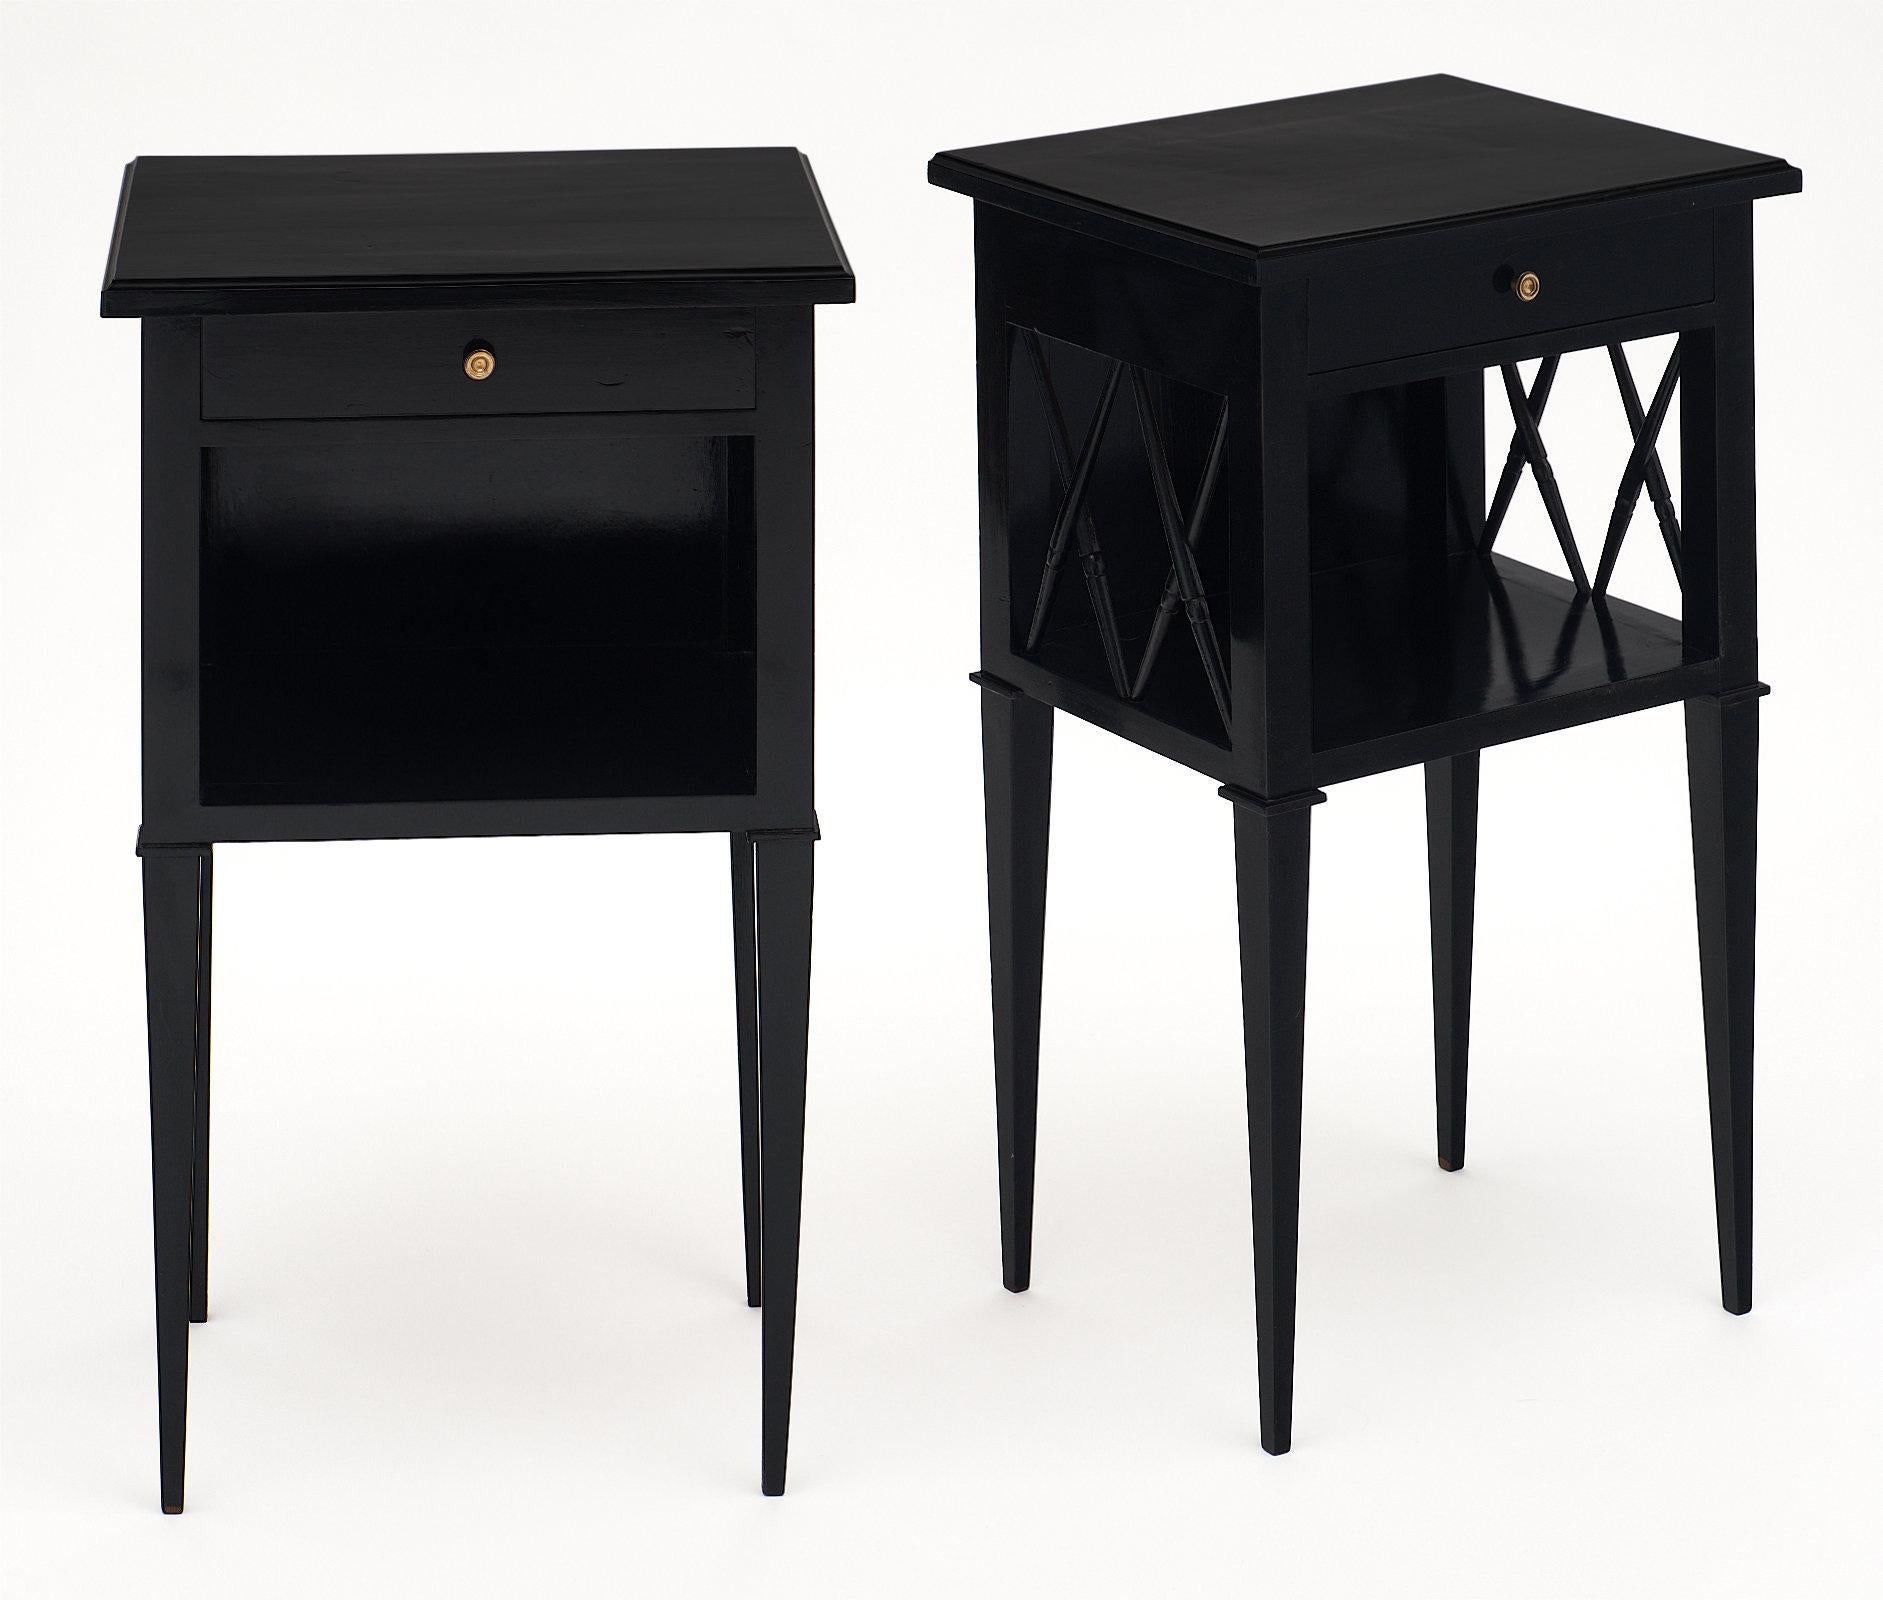 Antique Directoire style ebonized side tables each with one dovetailed drawer. The solid cherrywood construction has been ebonized and finished with a lustrous French polish. The sides are detailed with stylized bamboo stretchers. We love the